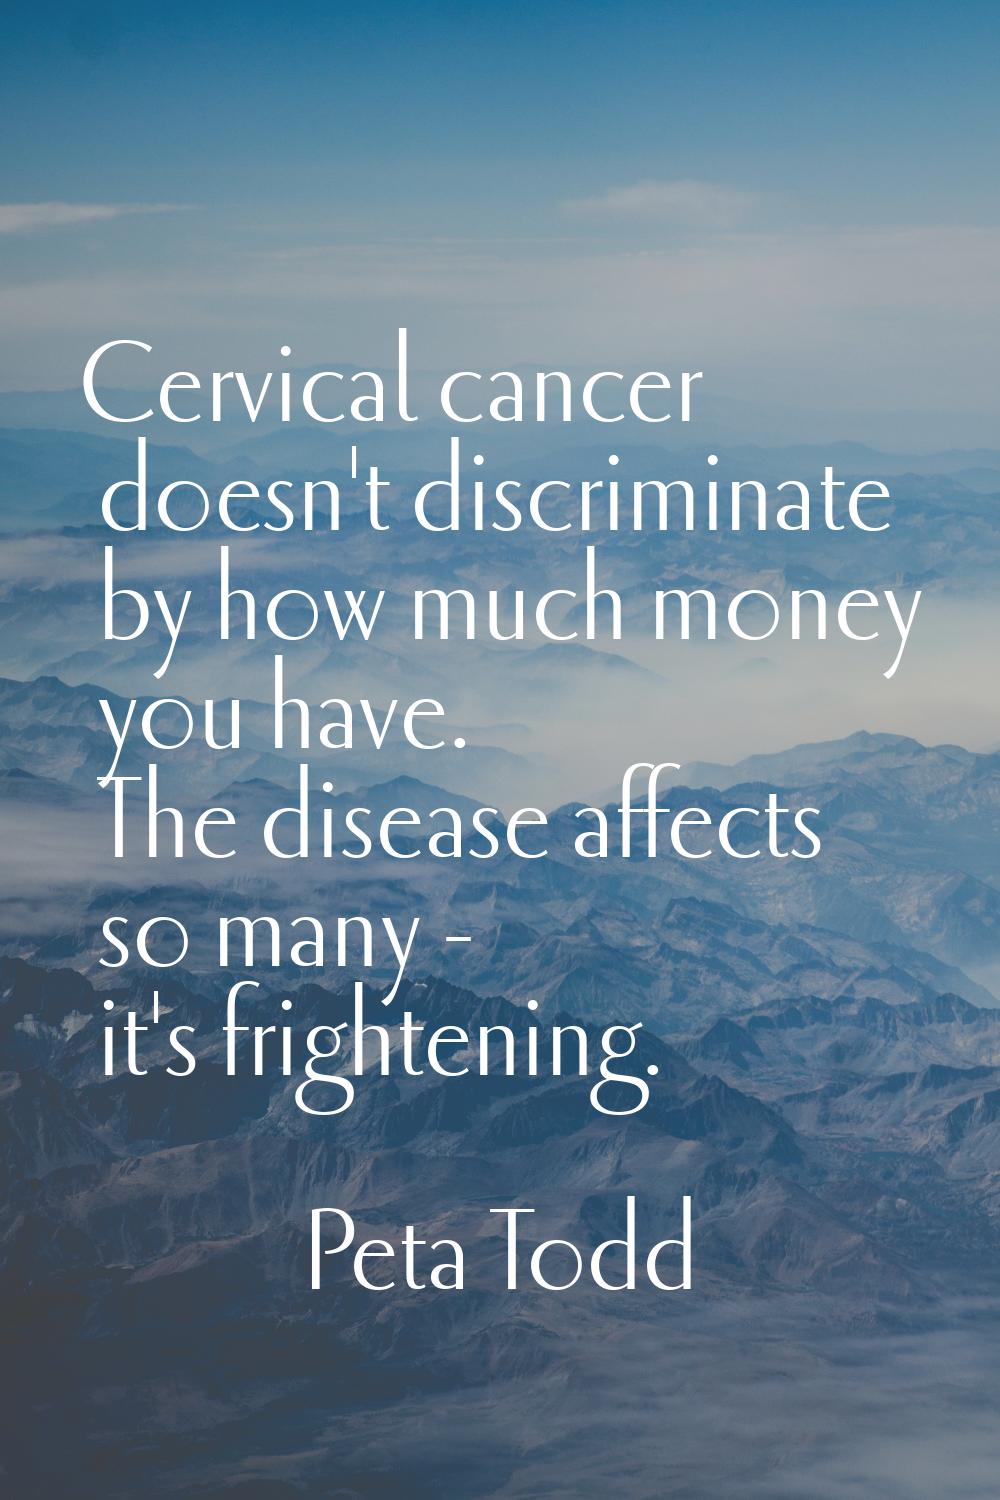 Cervical cancer doesn't discriminate by how much money you have. The disease affects so many - it's